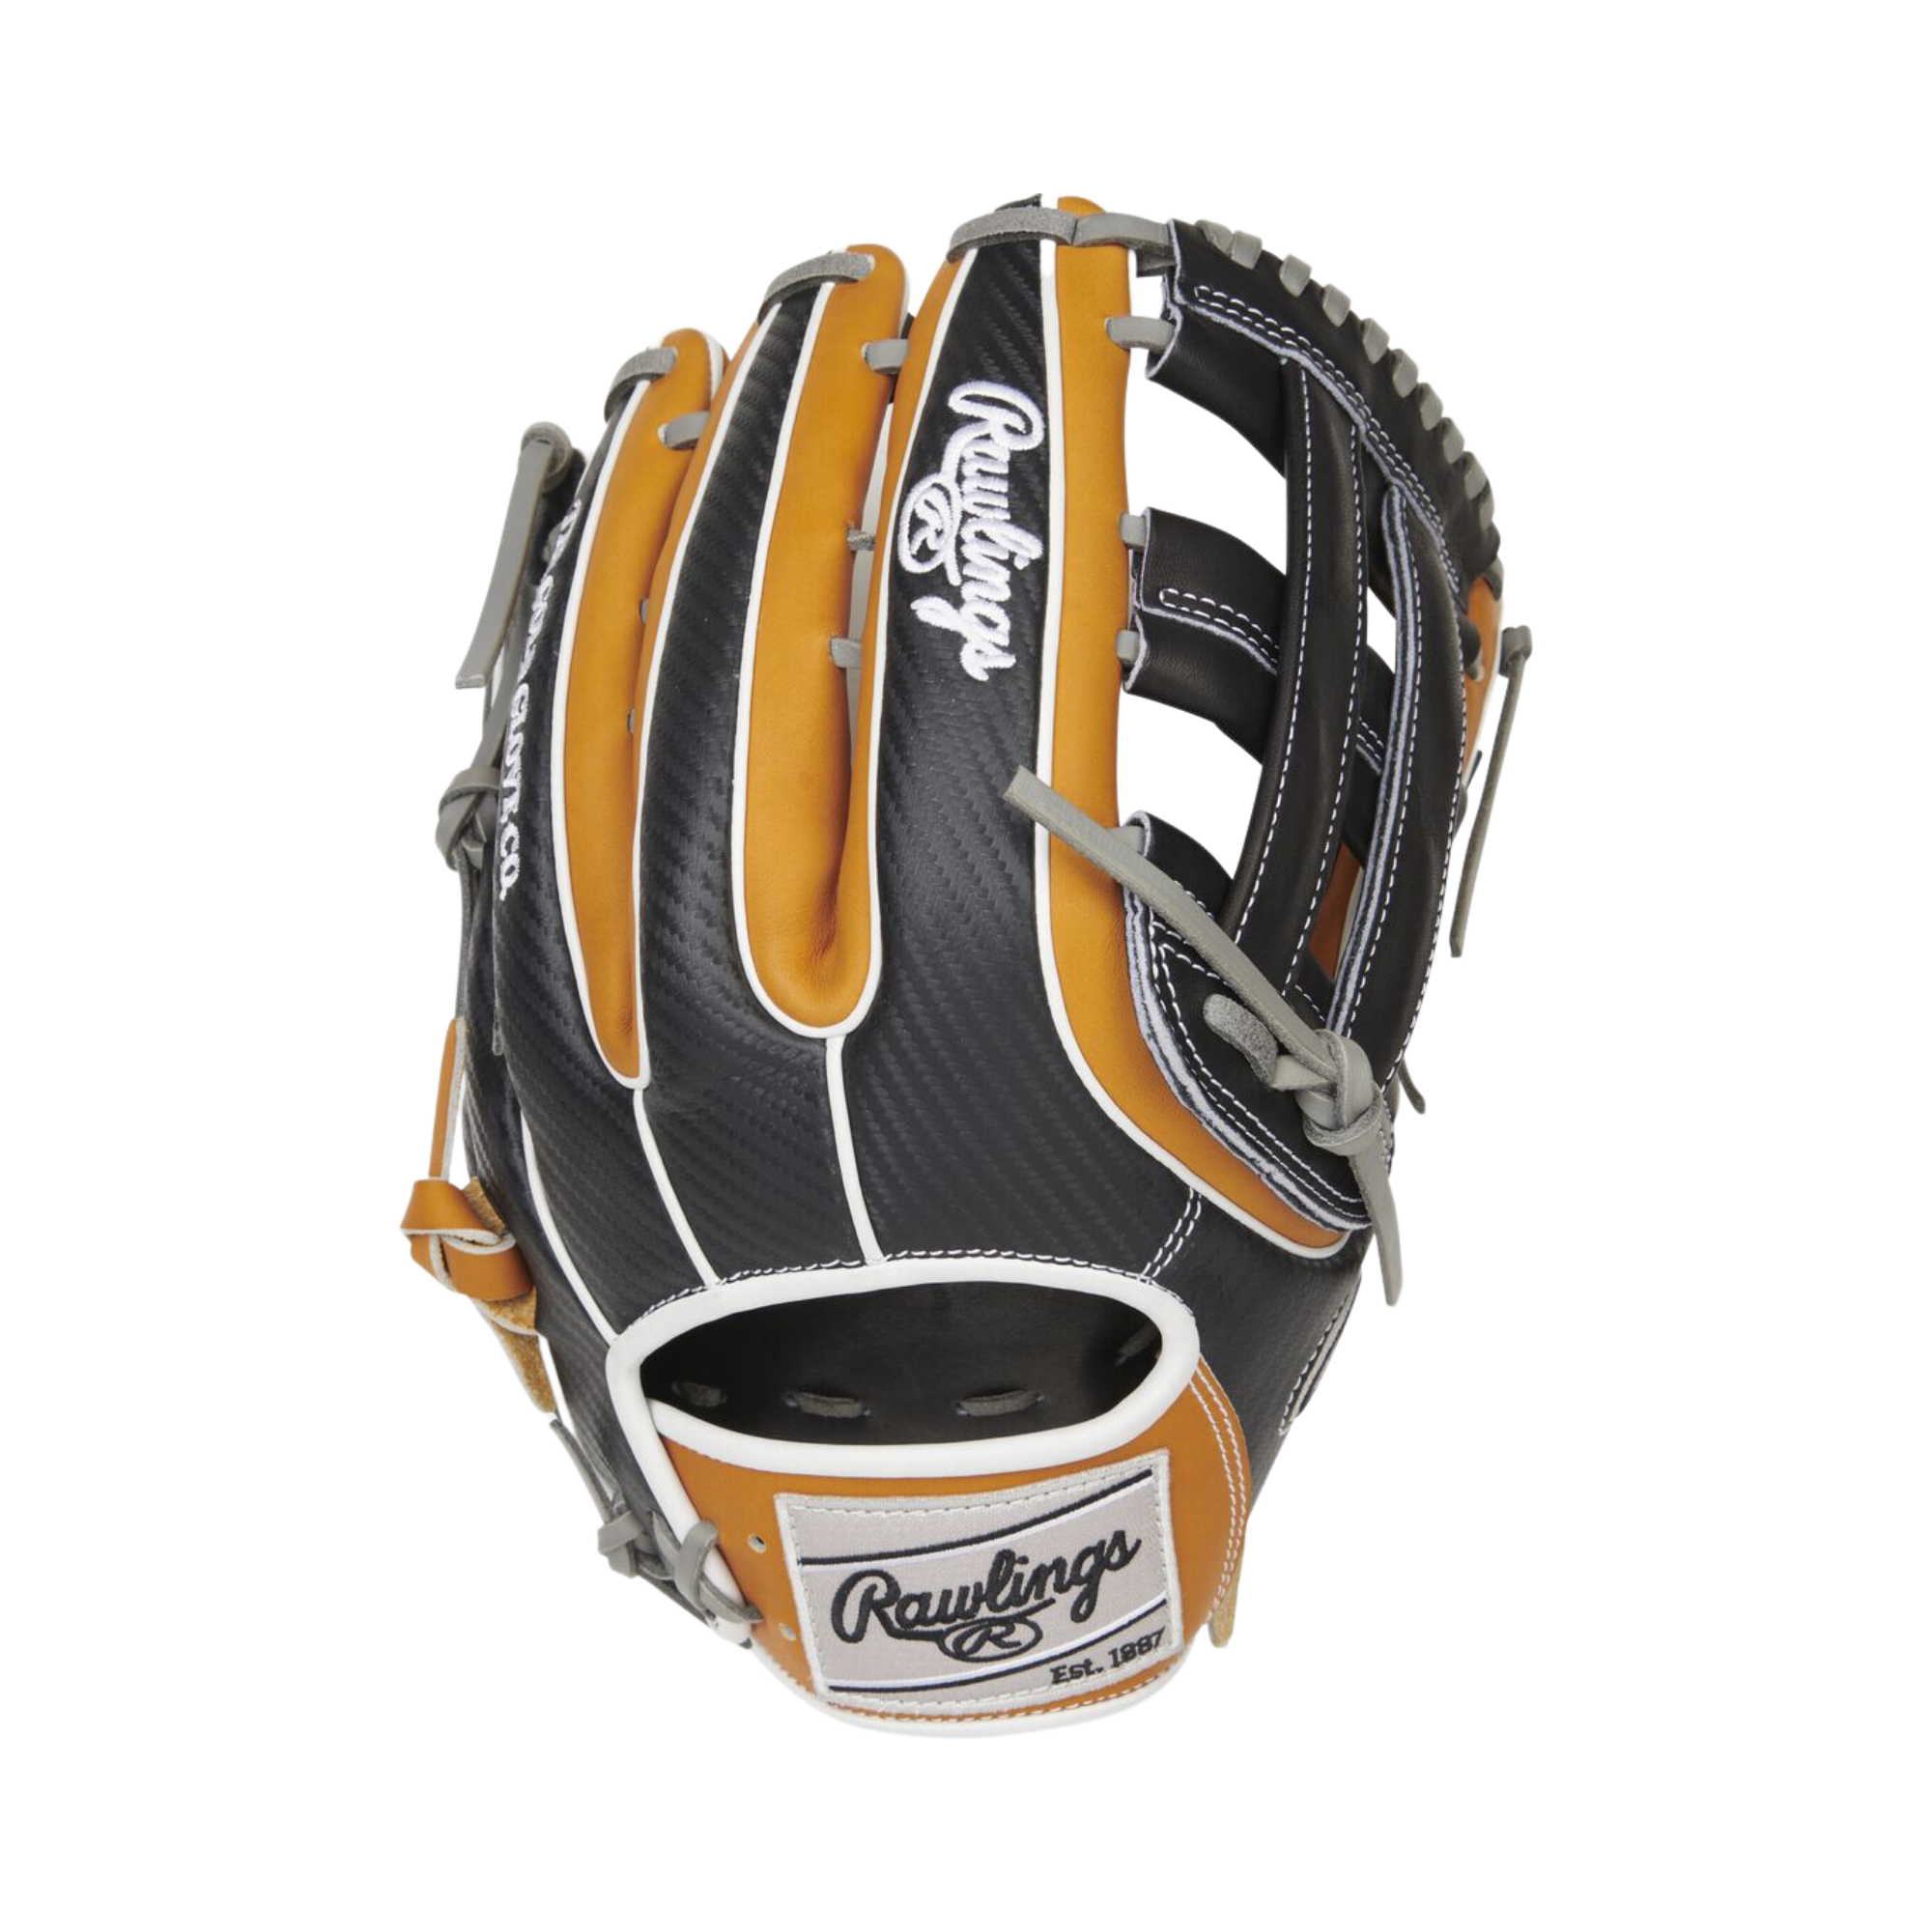 Rawlings Heart of the Hide Hyper Shell Series Outfield Glove Pro H Web RHT 12.75"